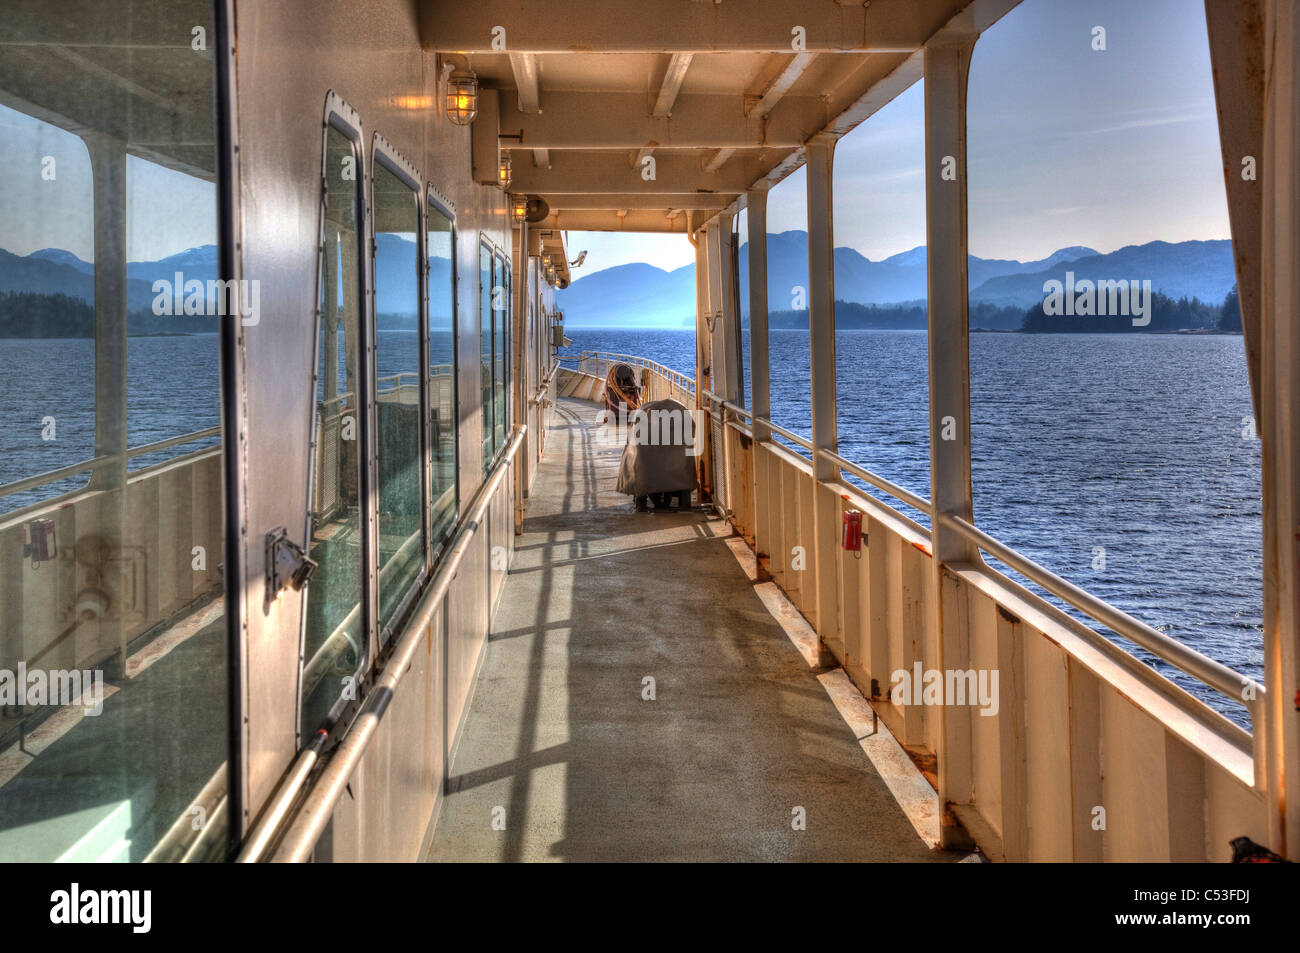 View of an inter-island ferry bound for Metakatla with scenic views of Southeast Alaska's Inside Passage. Stock Photo